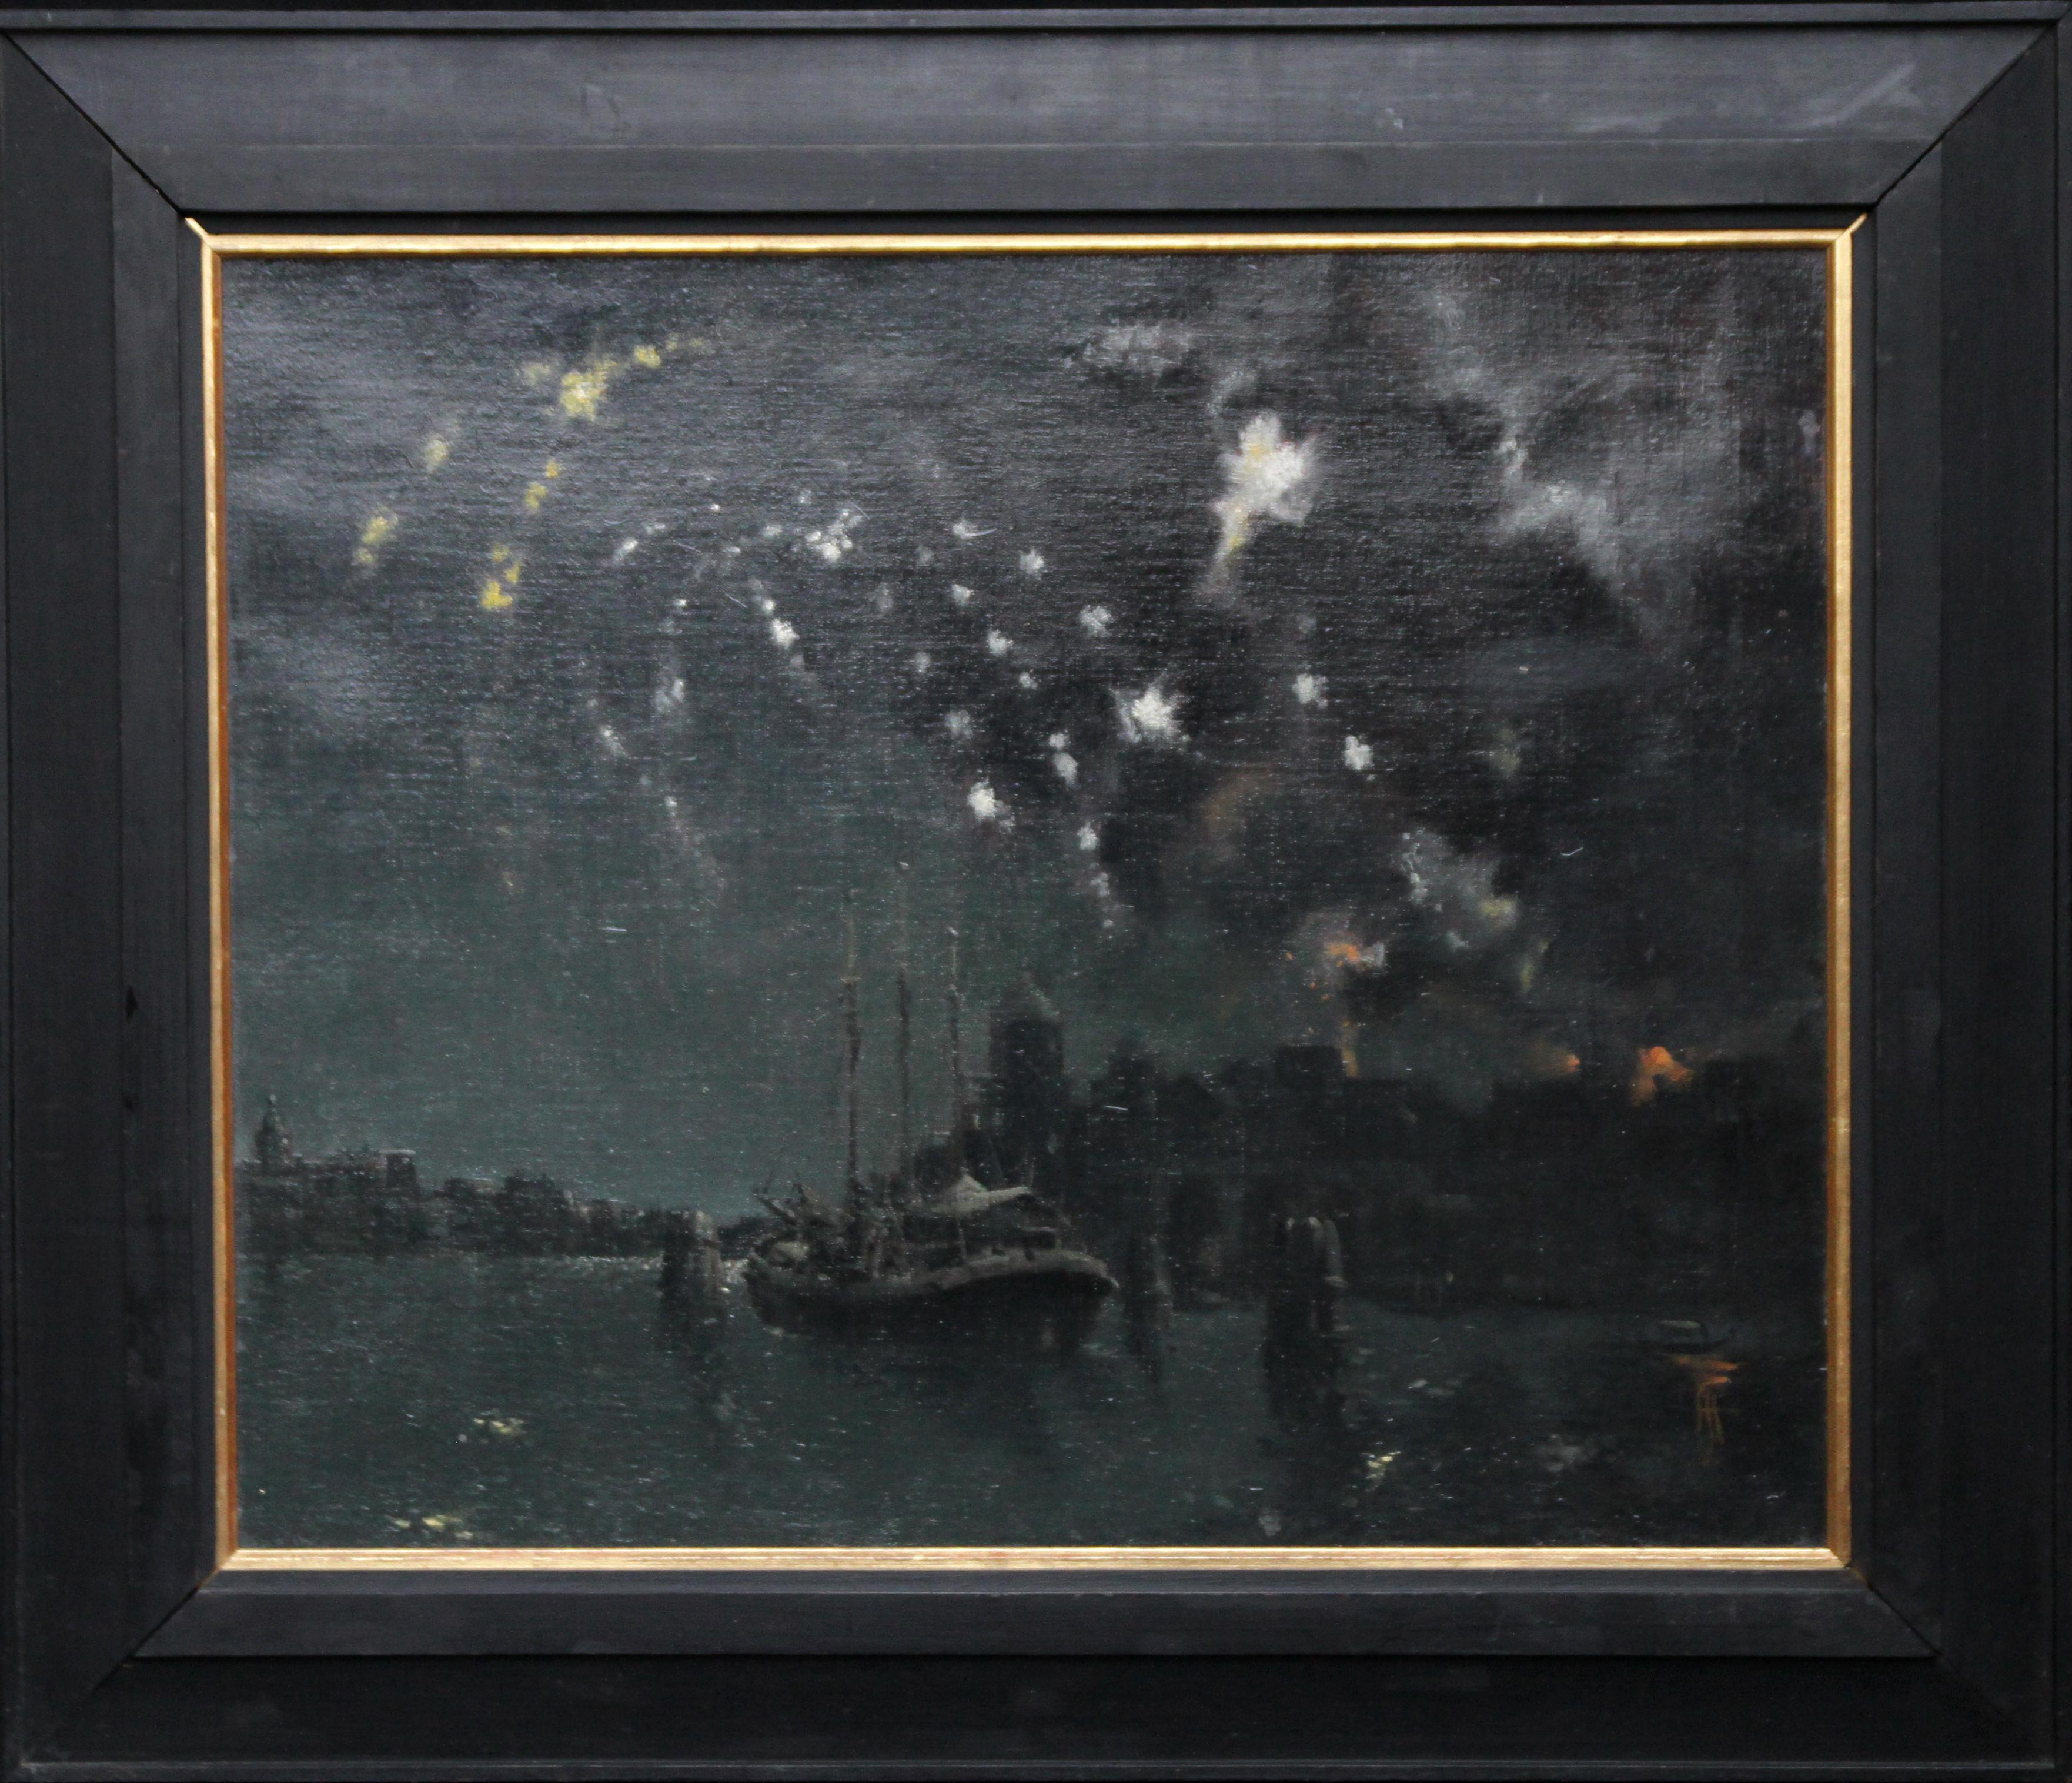 Fireworks on the Thames, London - British art river night landscape oil painting For Sale 4